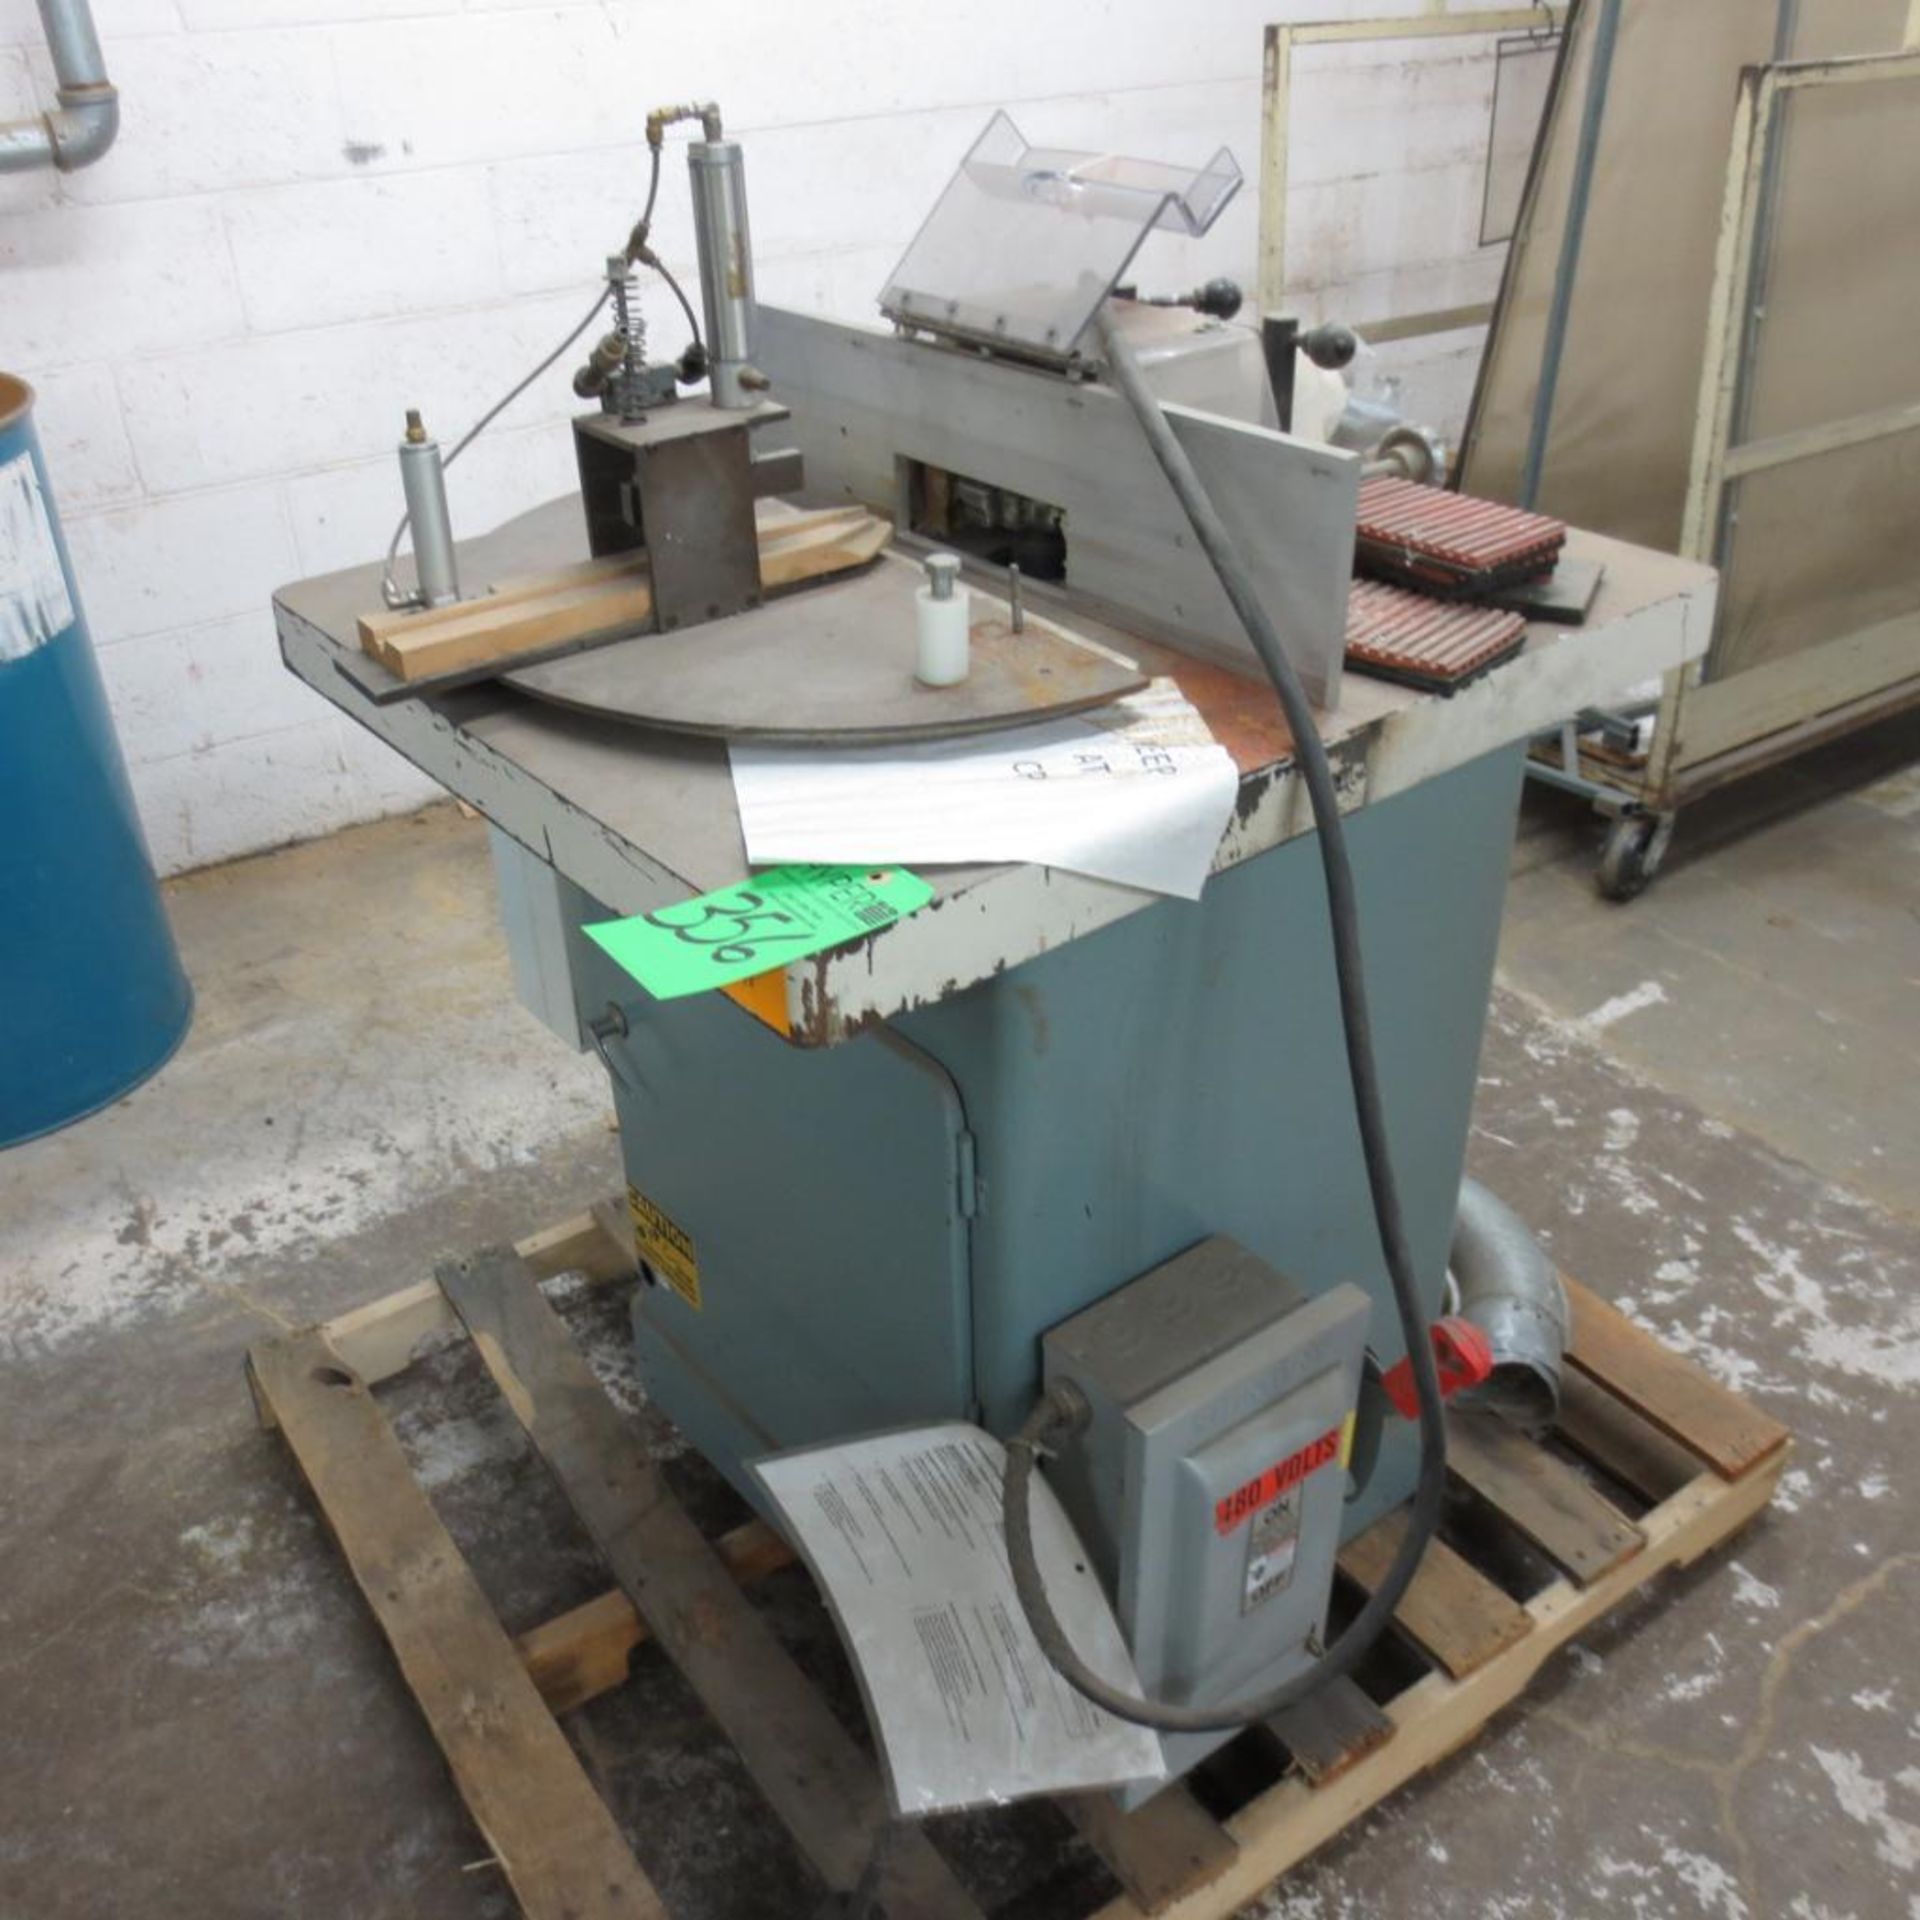 Northtech Model NT-101-53-1 1/4 Single Spindle Shaper, 5-HP, 3 PH, 230V - Image 2 of 3